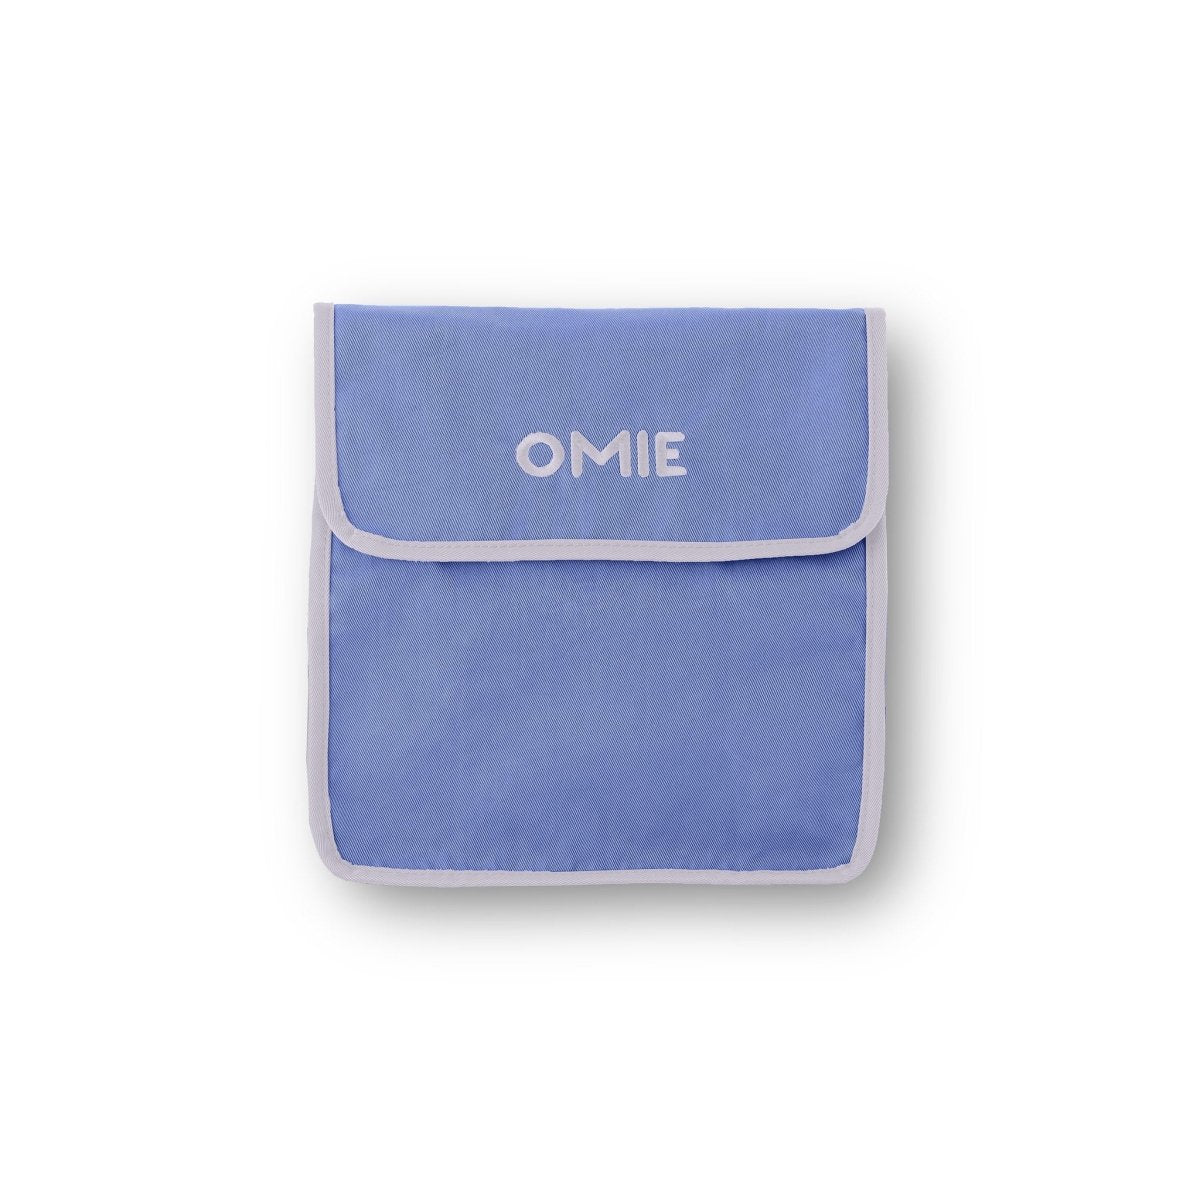 OmieBox Accessories Collection, customer, costume accessory, NEW PRODUCT  ANNOUNCEMENT! Since launching OmieBox, customers have been asking us to  create accessory items that can make their OmieBox experience even, By  OmieLife